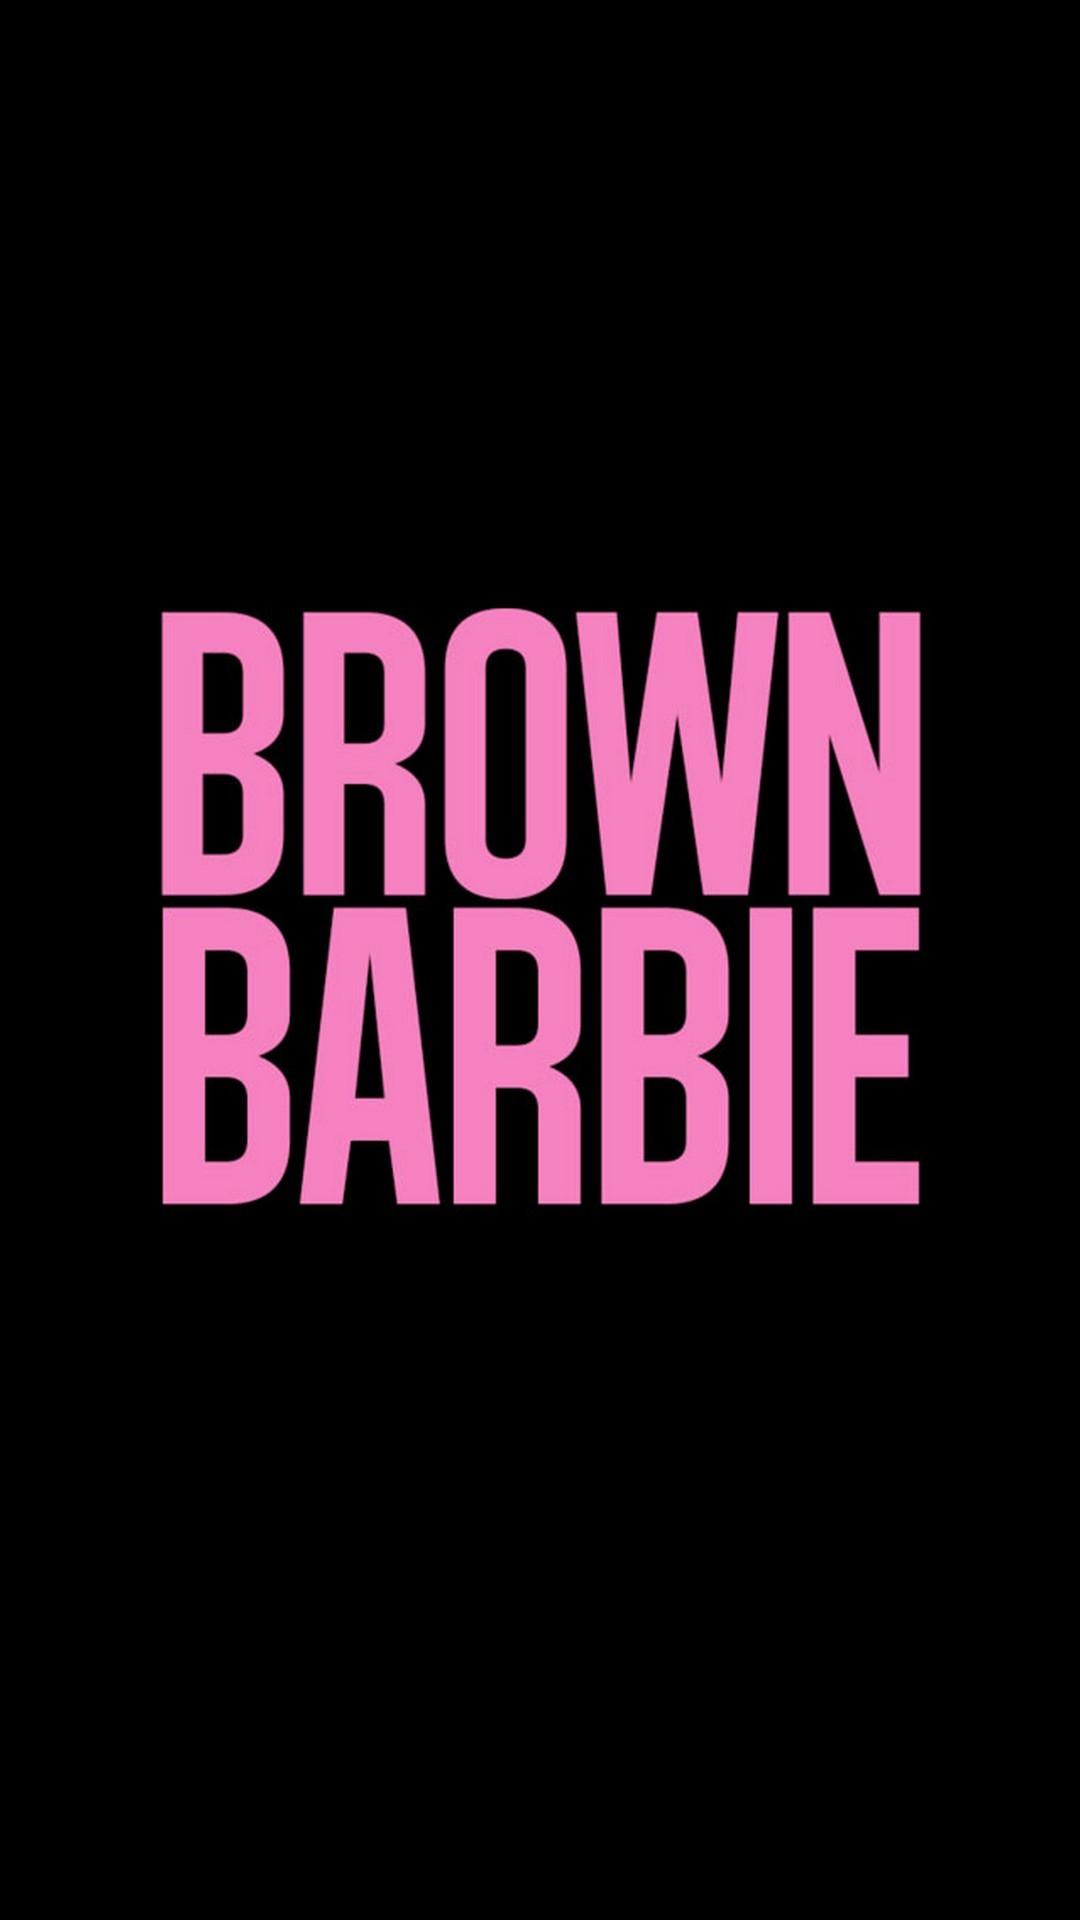 Cute, Girly, Wallpapers, For, Iphone, Brown, Barbie